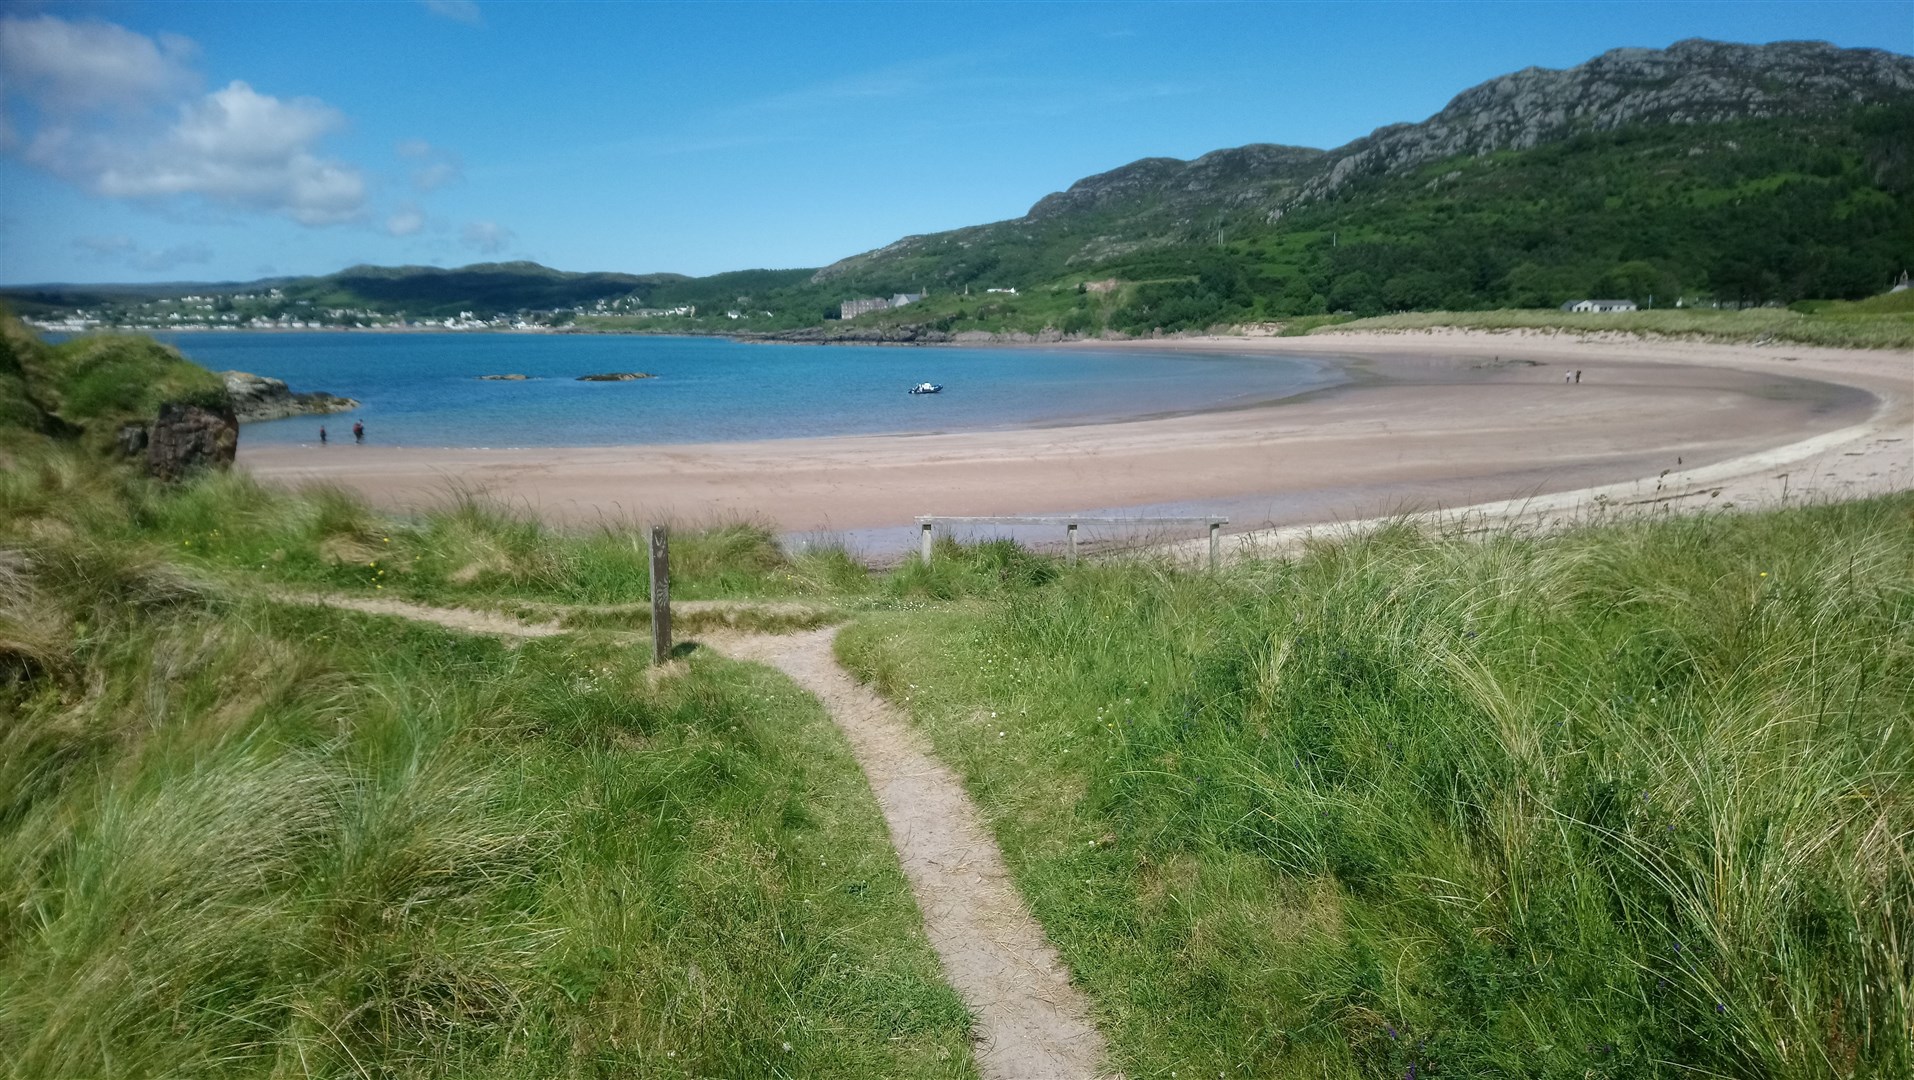 Water quality at Gairloch Beach has been rated as excellent.